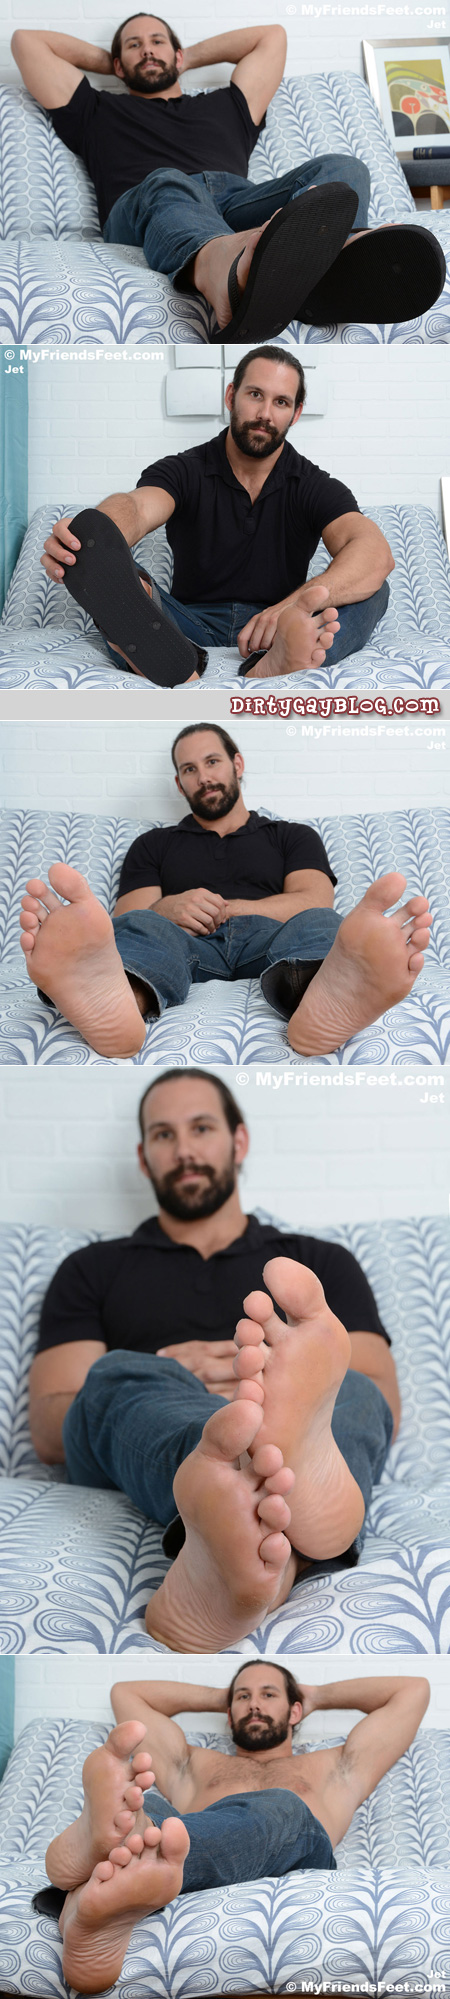 Hairy muscle hunk showing off his big bare feet.